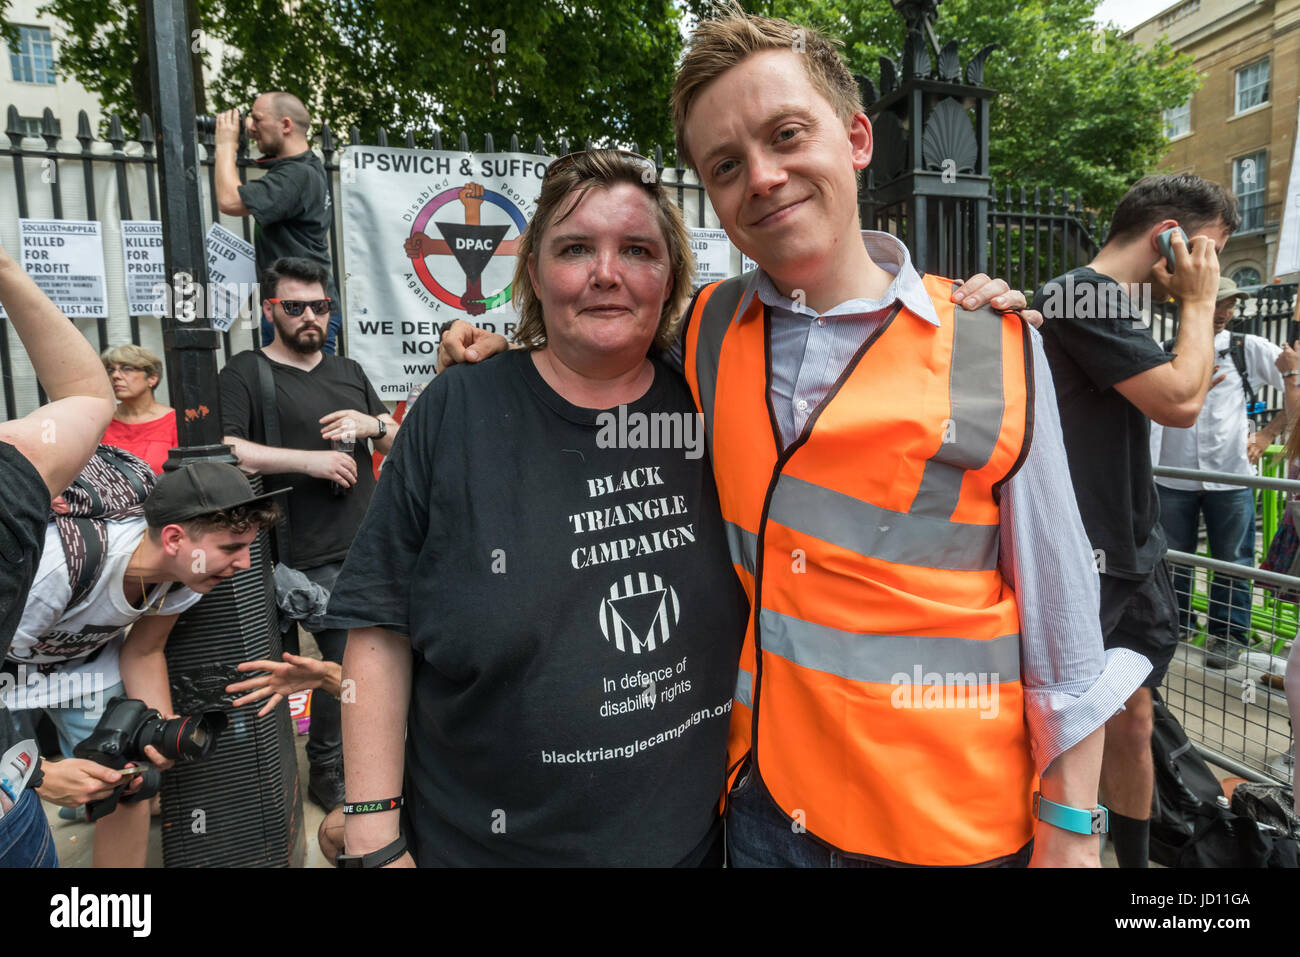 June 17, 2017 - London, UK - London, UK. 17th June, 2017. Paula Peters of DPAC and protest organiser Owen Jones at the Downing St protest calling on Theresa May to resign. Mostly made up of vocal supporters of Jeremy Corbyn, buoyed up by the election results which showed him to be eminently electable, there were speeches by Labour MPs Marsha De Cordova who gained Battersea from the Conservatives, Rupa Huq who greatly increased her tiny majority and Shadow Education Secretary Angela Rayner. There were others who spoke about the DUP, as a party intrinsically linked with Protestant terrorist grou Stock Photo